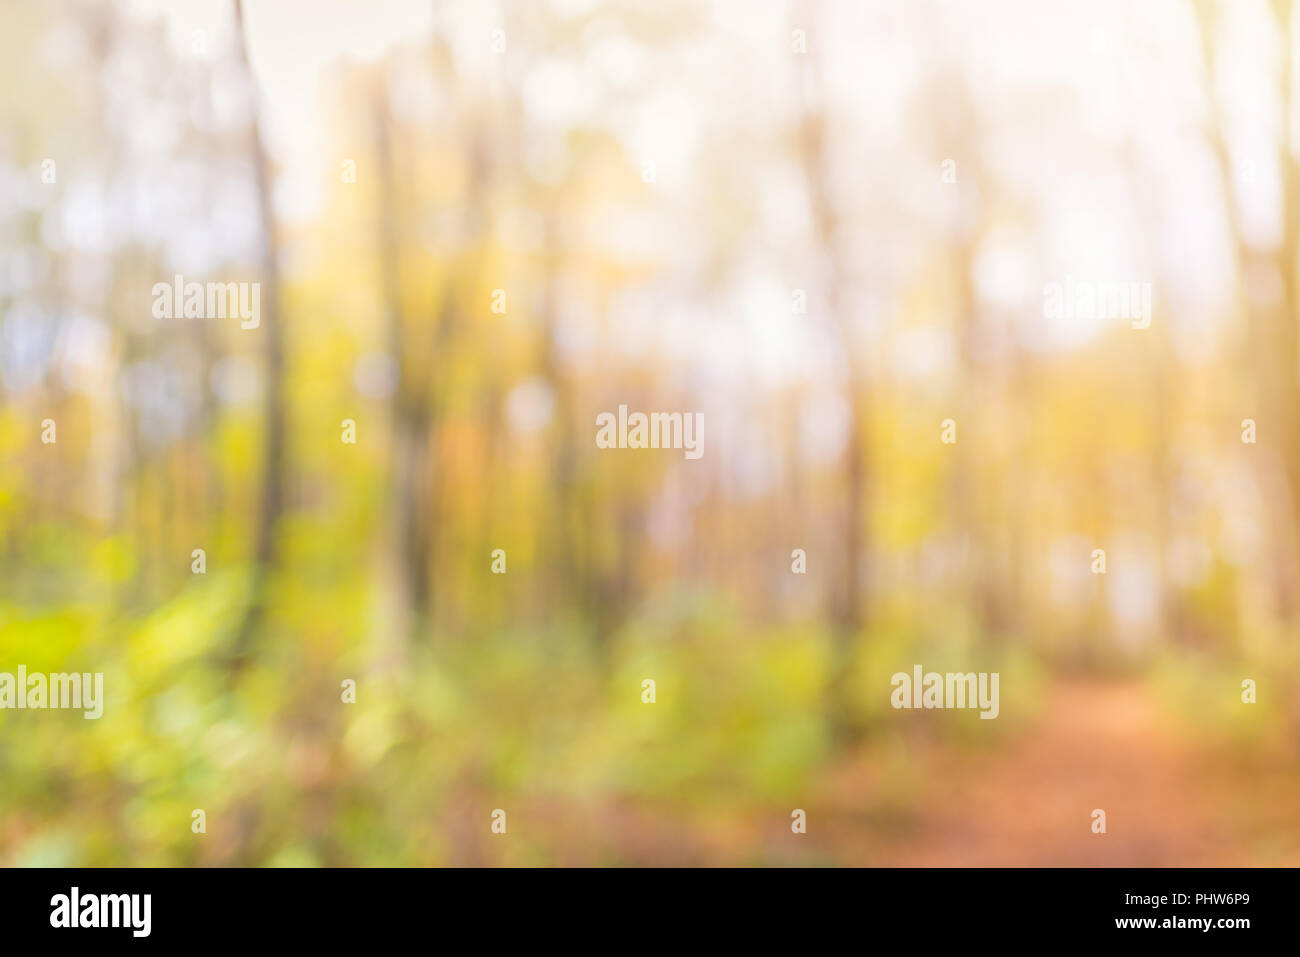 Abstract unfocused and soft background for design. Magical autumn forest, blur technique Stock Photo